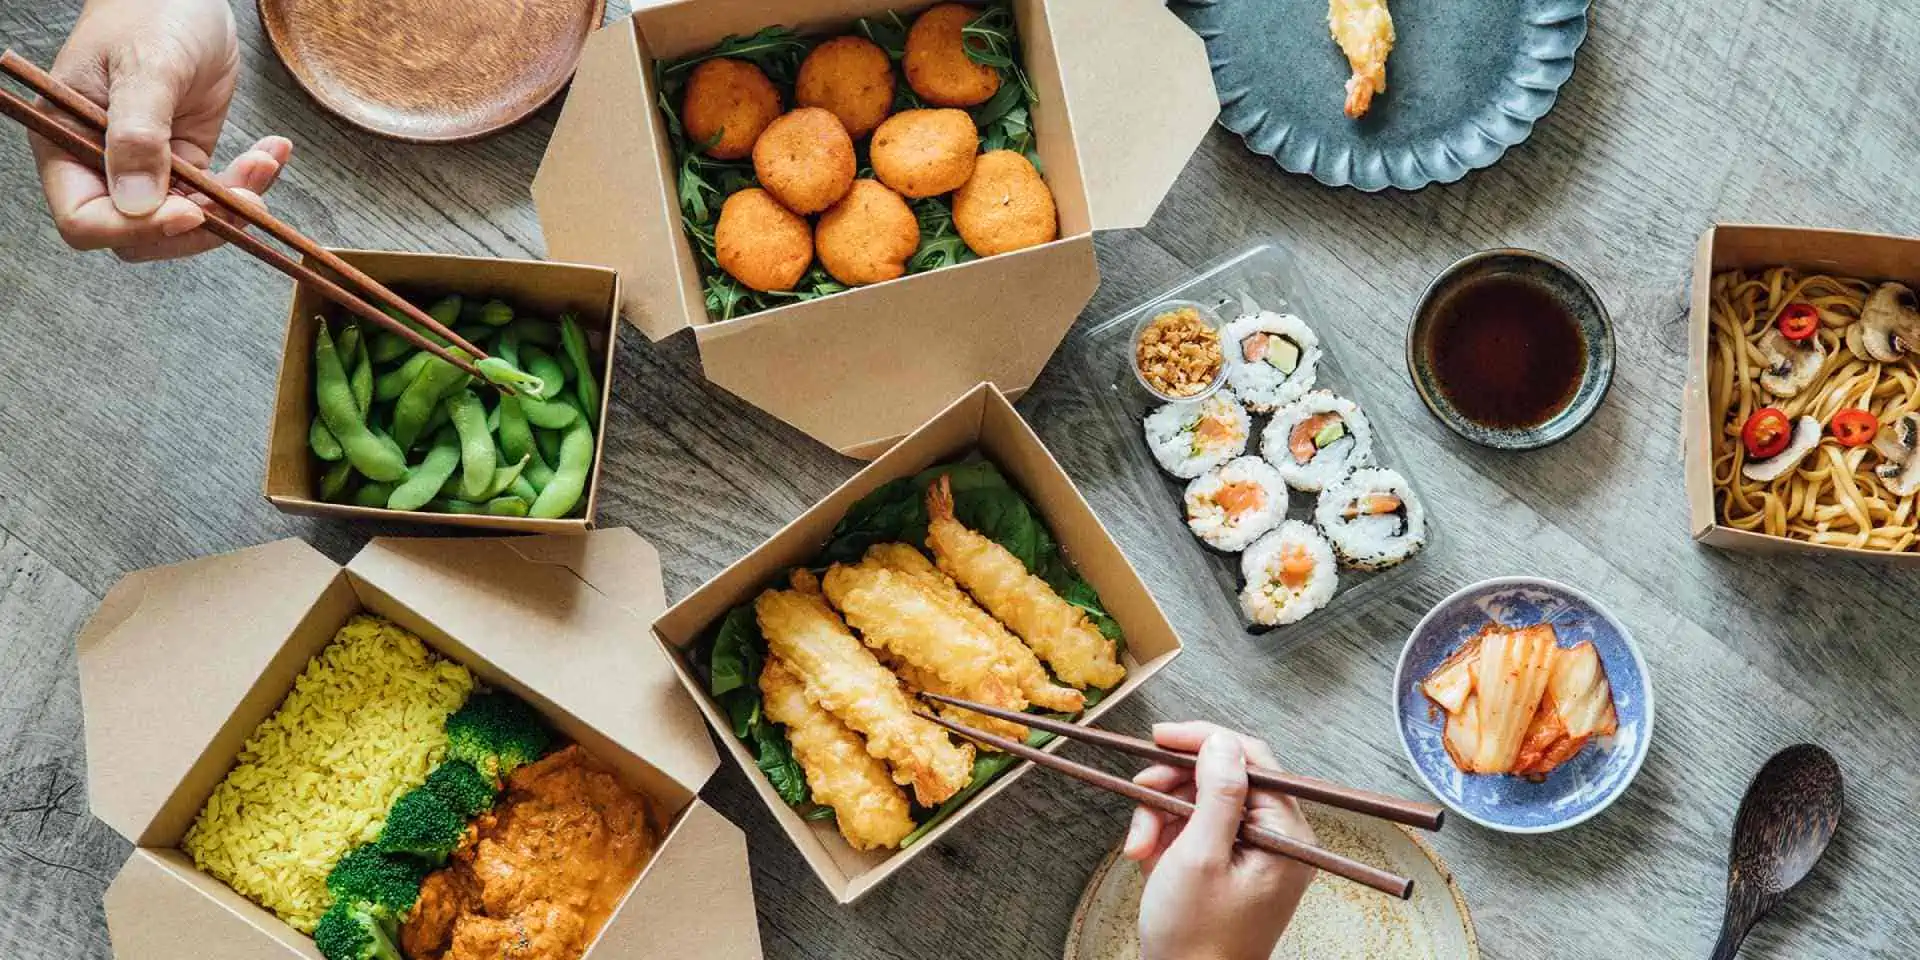 Good Start Packaging Helps Reduce the Environmental Impact of Takeout Food